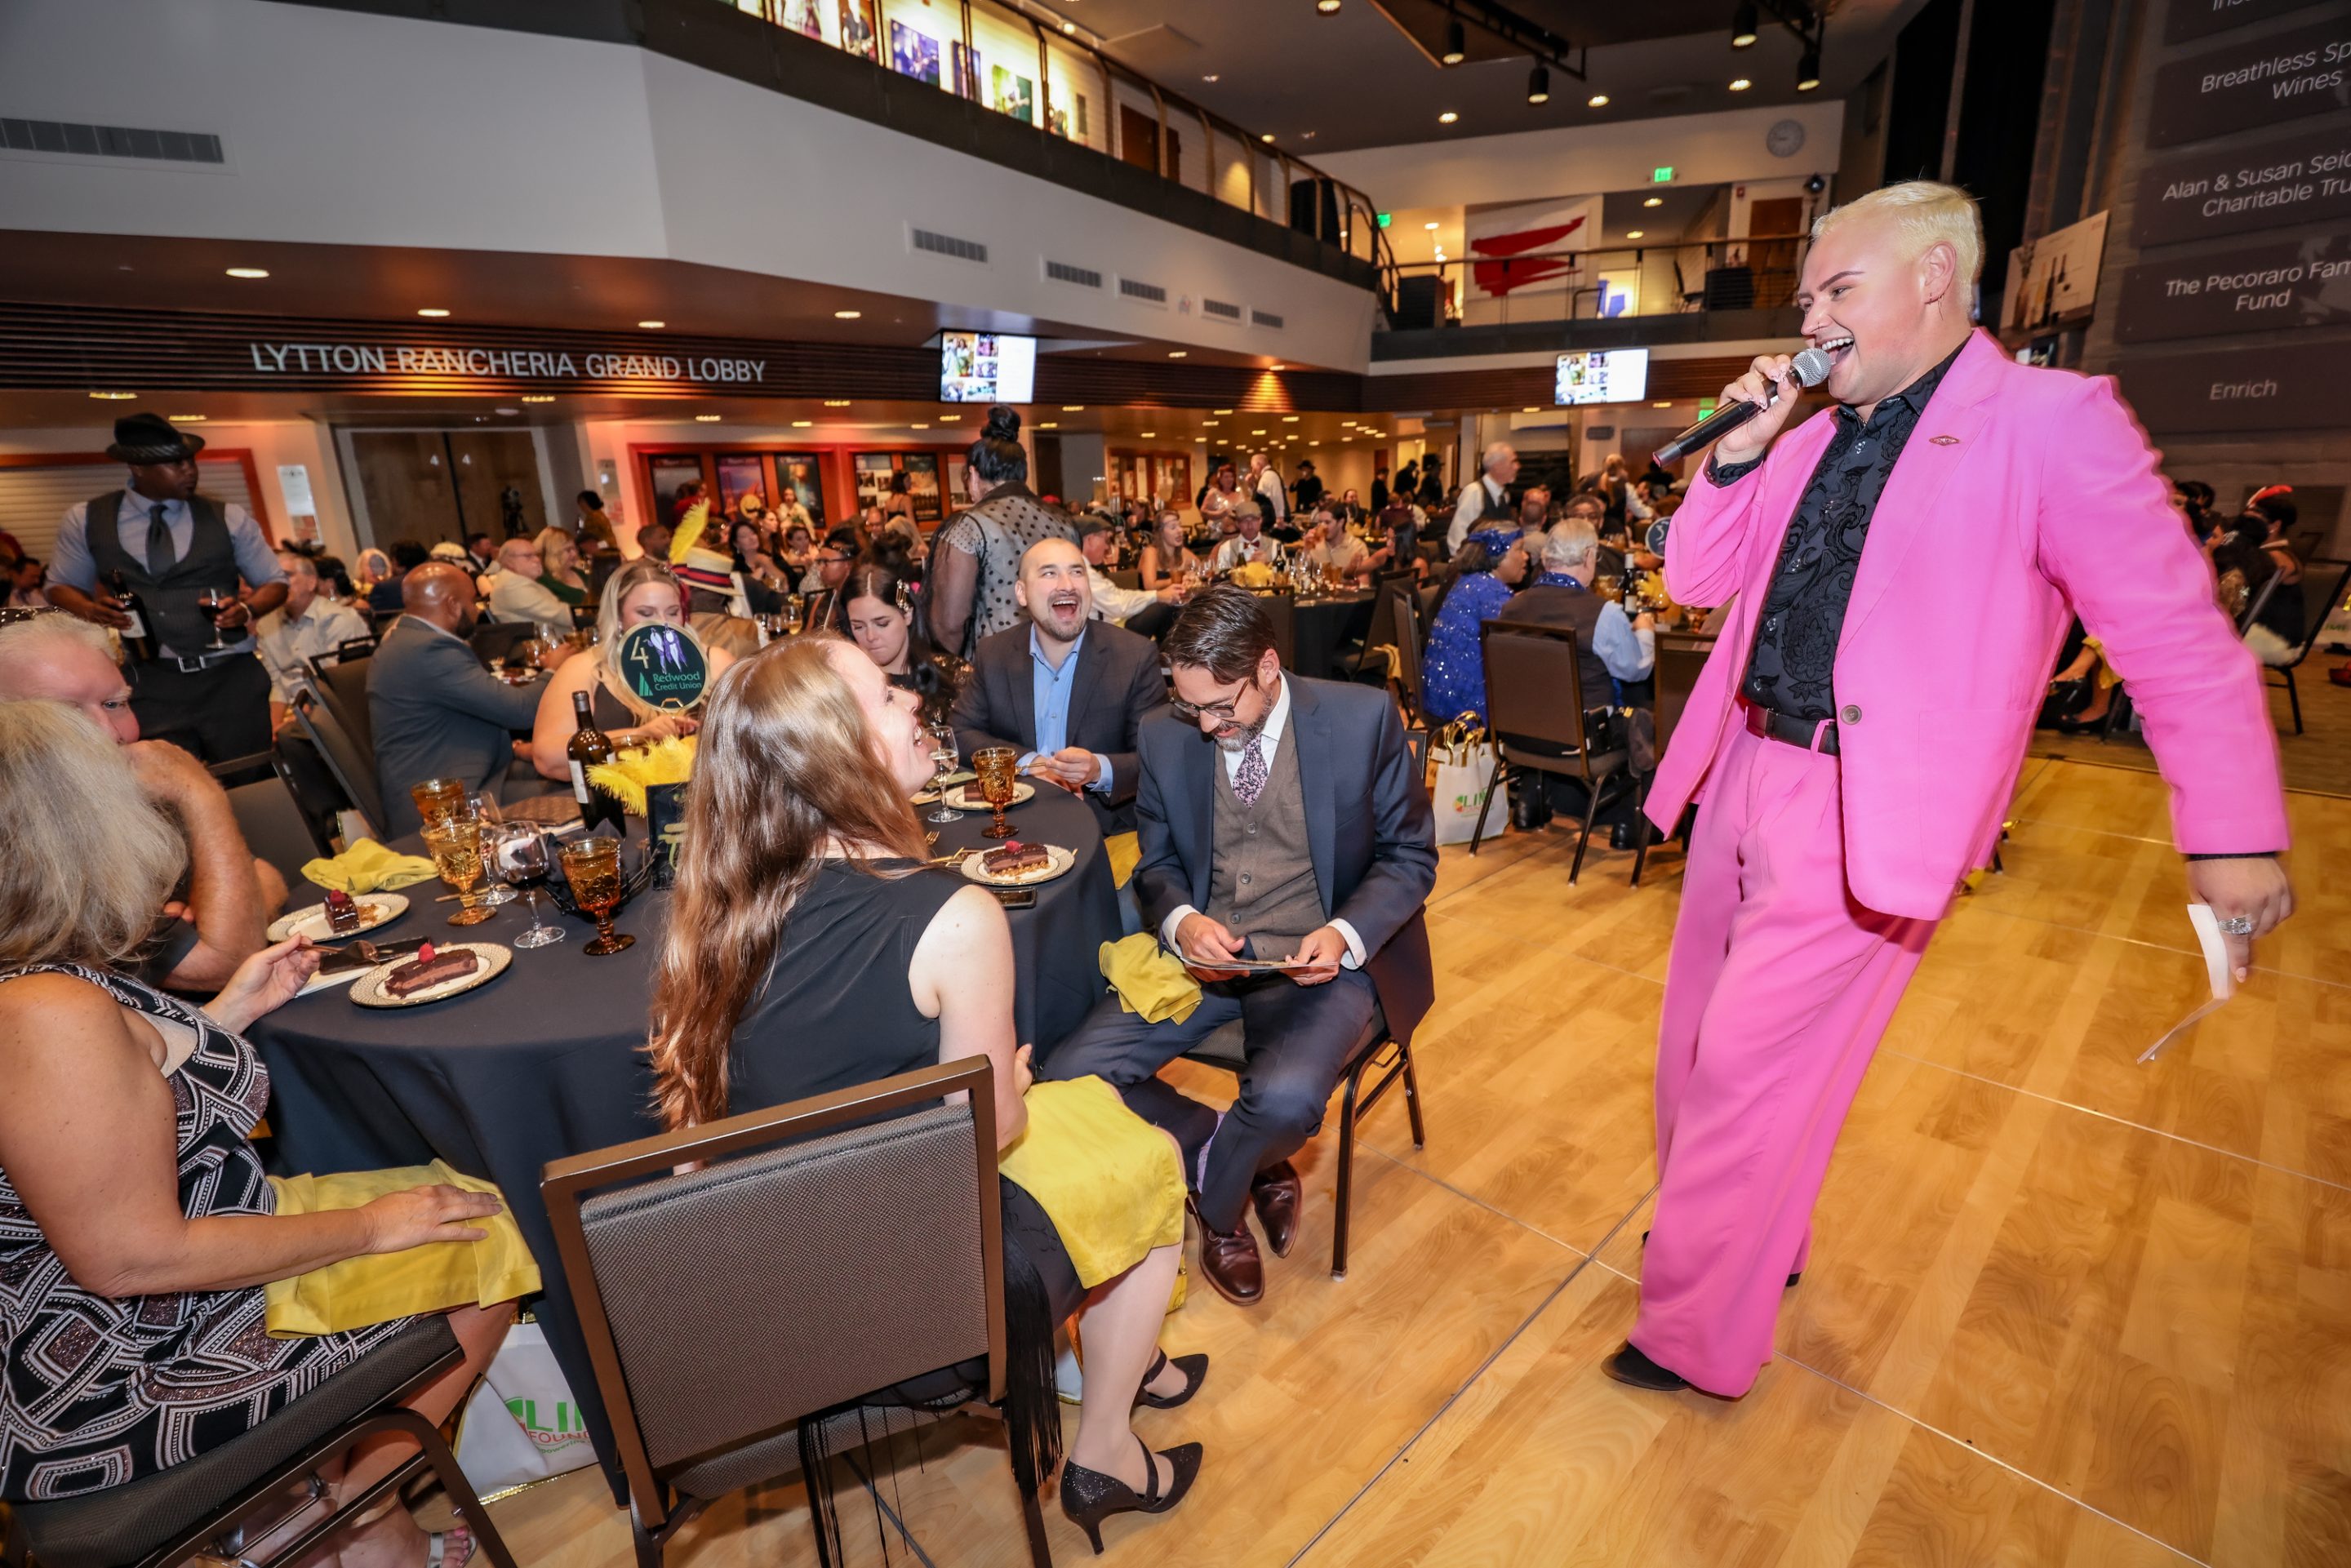 A man in a pink suit performing for a crowd at The LIME Foundation fundraiser.